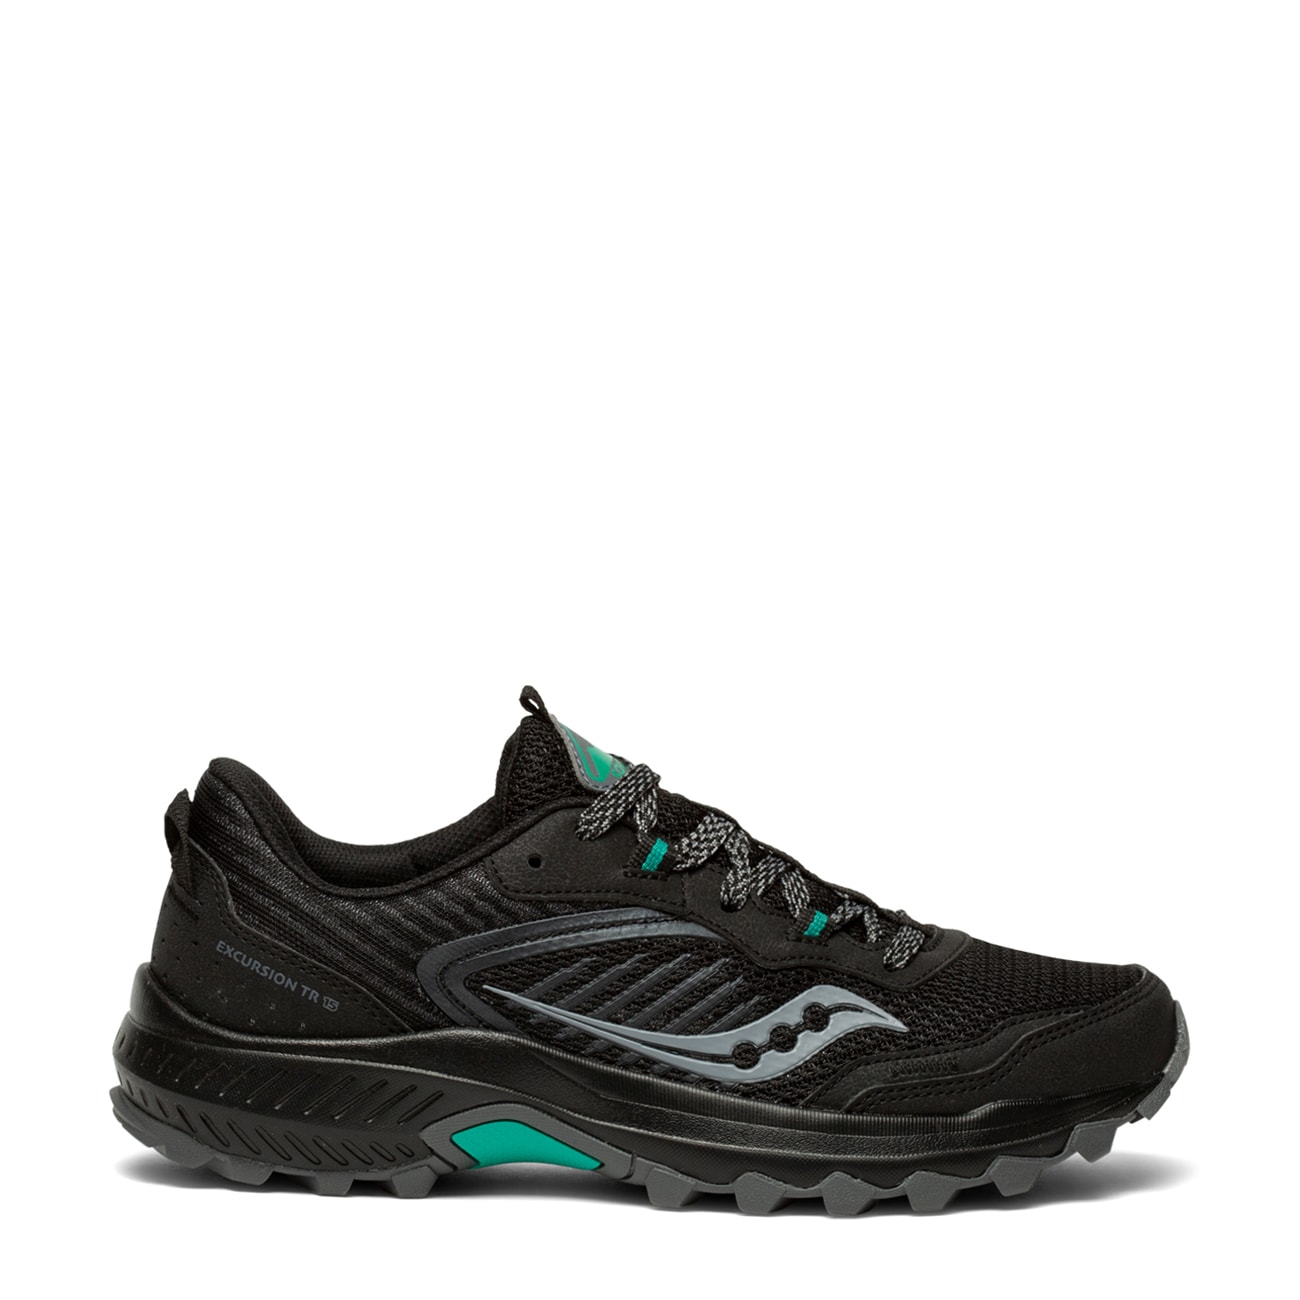 Saucony Women's Excursion TR15 Trail Running Shoe | The Shoe Company